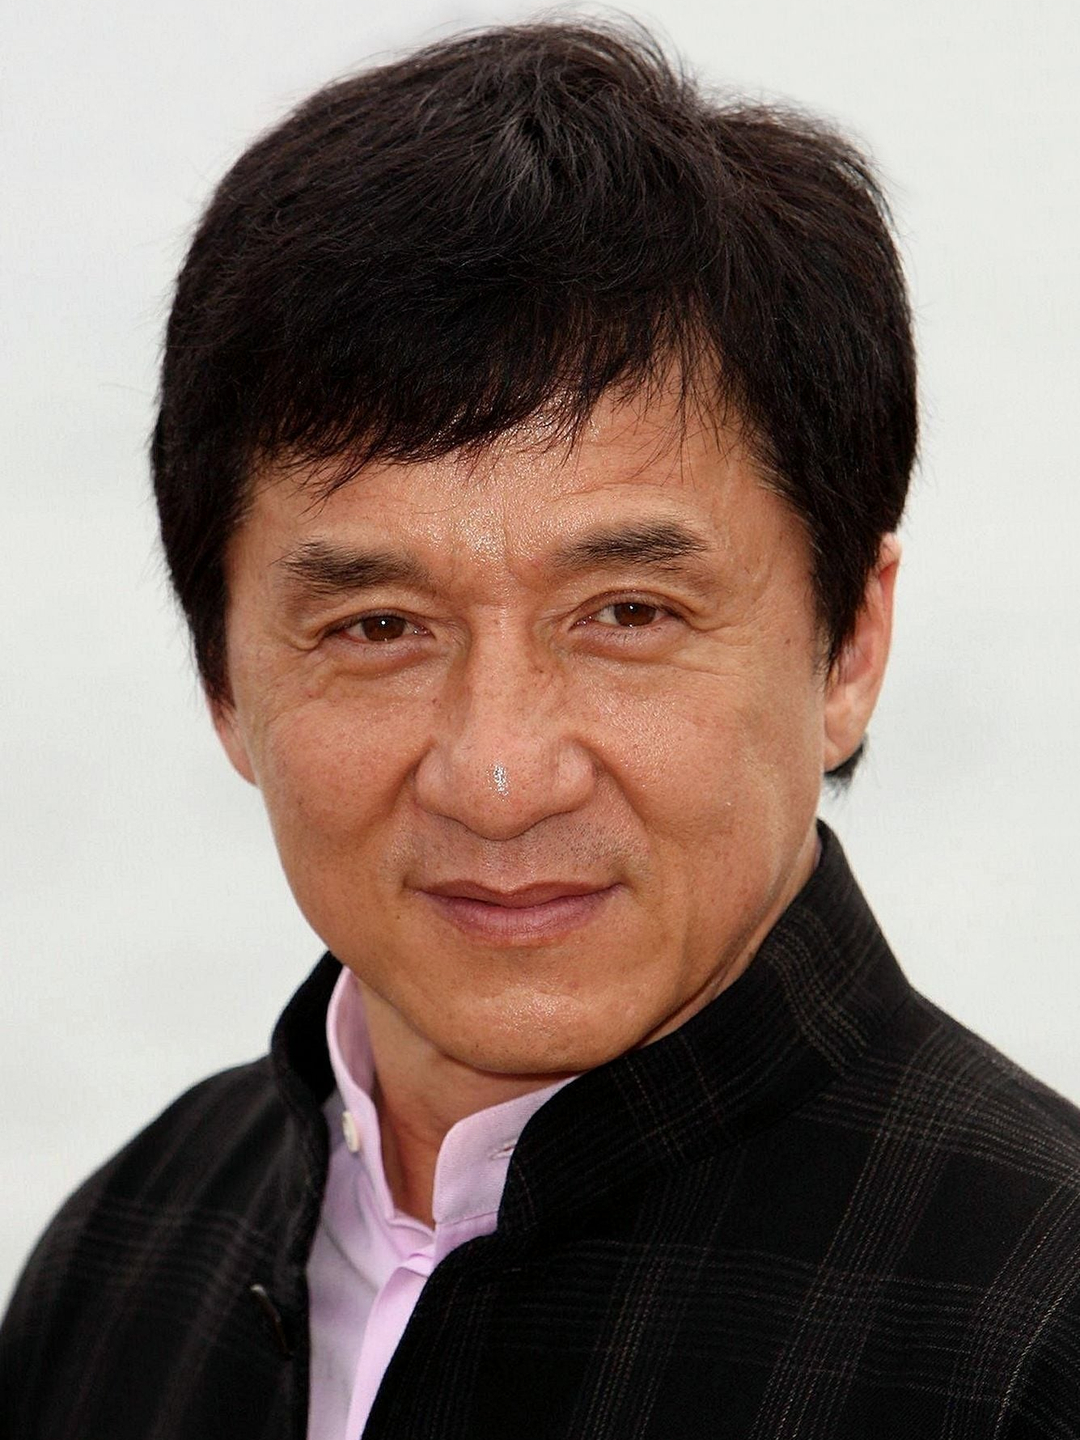 Jackie Chan who is his mother